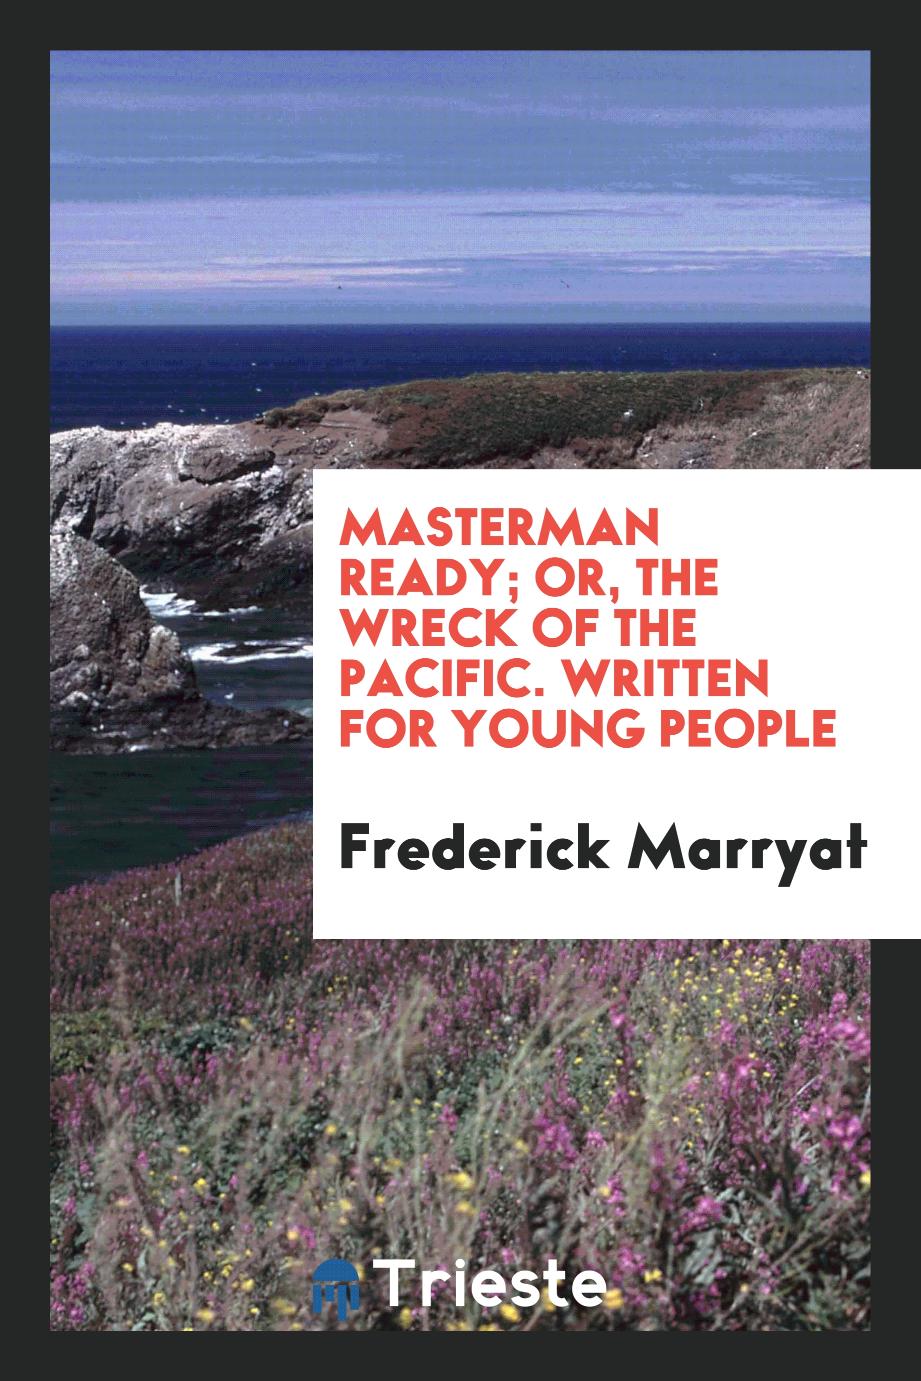 Masterman Ready; or, the wreck of the Pacific. Written for young people